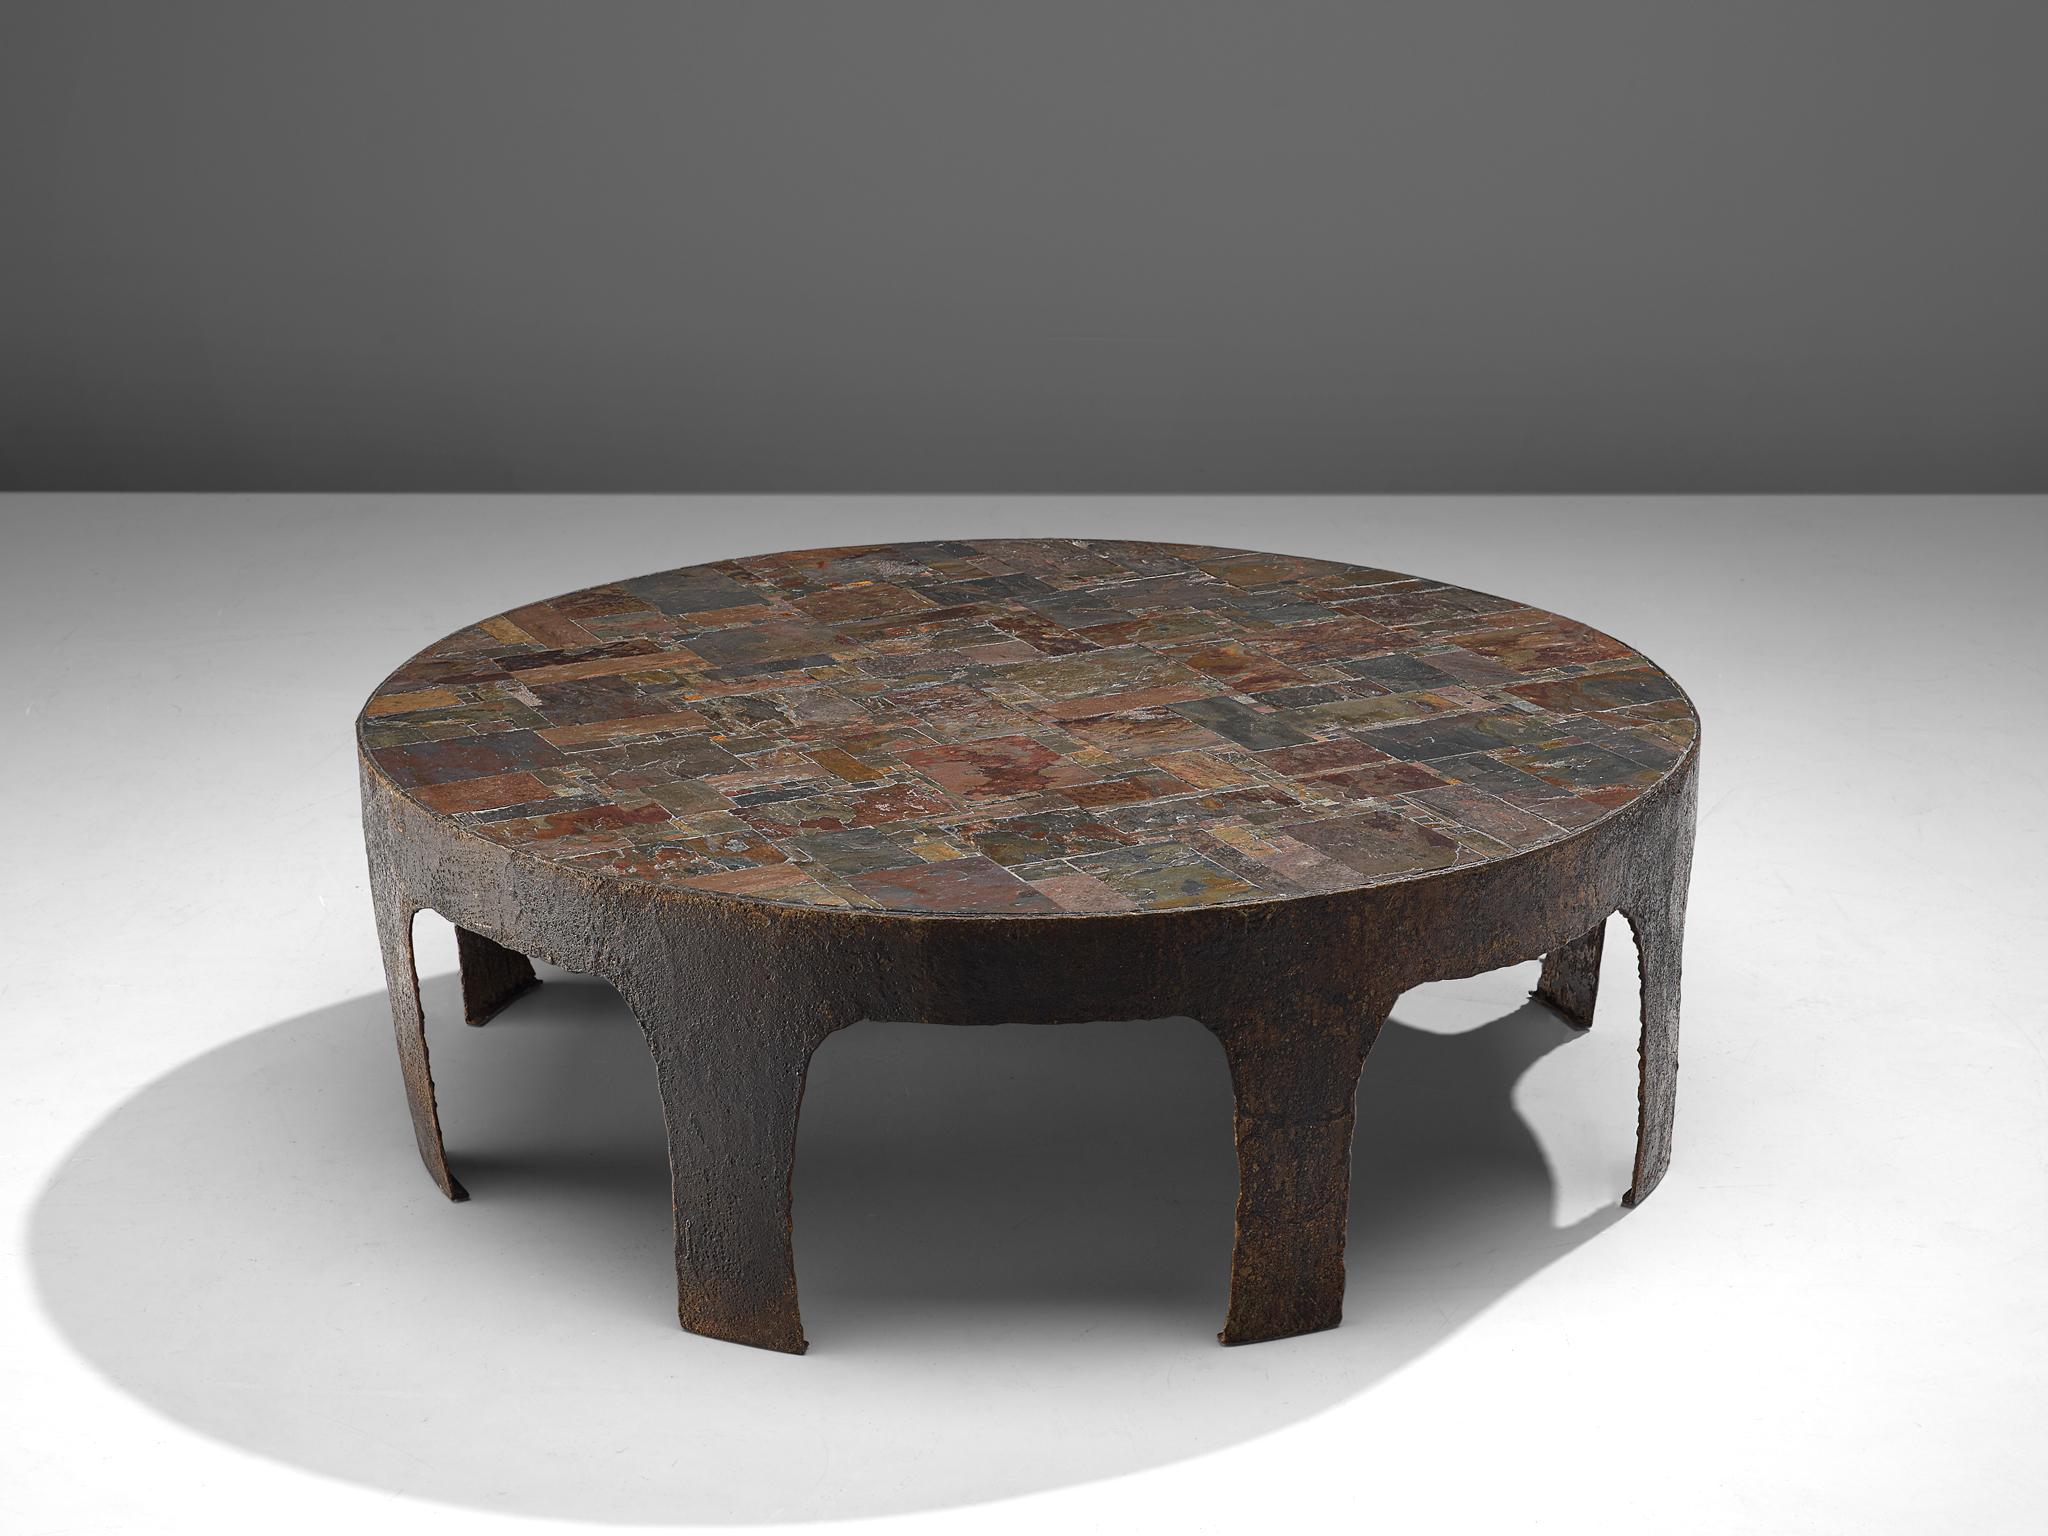 Pia Manu, coffee table, forged iron, ceramic and natural stone, Belgium, 1960s.

This unique, handmade piece with cut and forged iron frame is designed in the workshop of Pia Manu. Interesting details are the rough edges of the iron arches and the